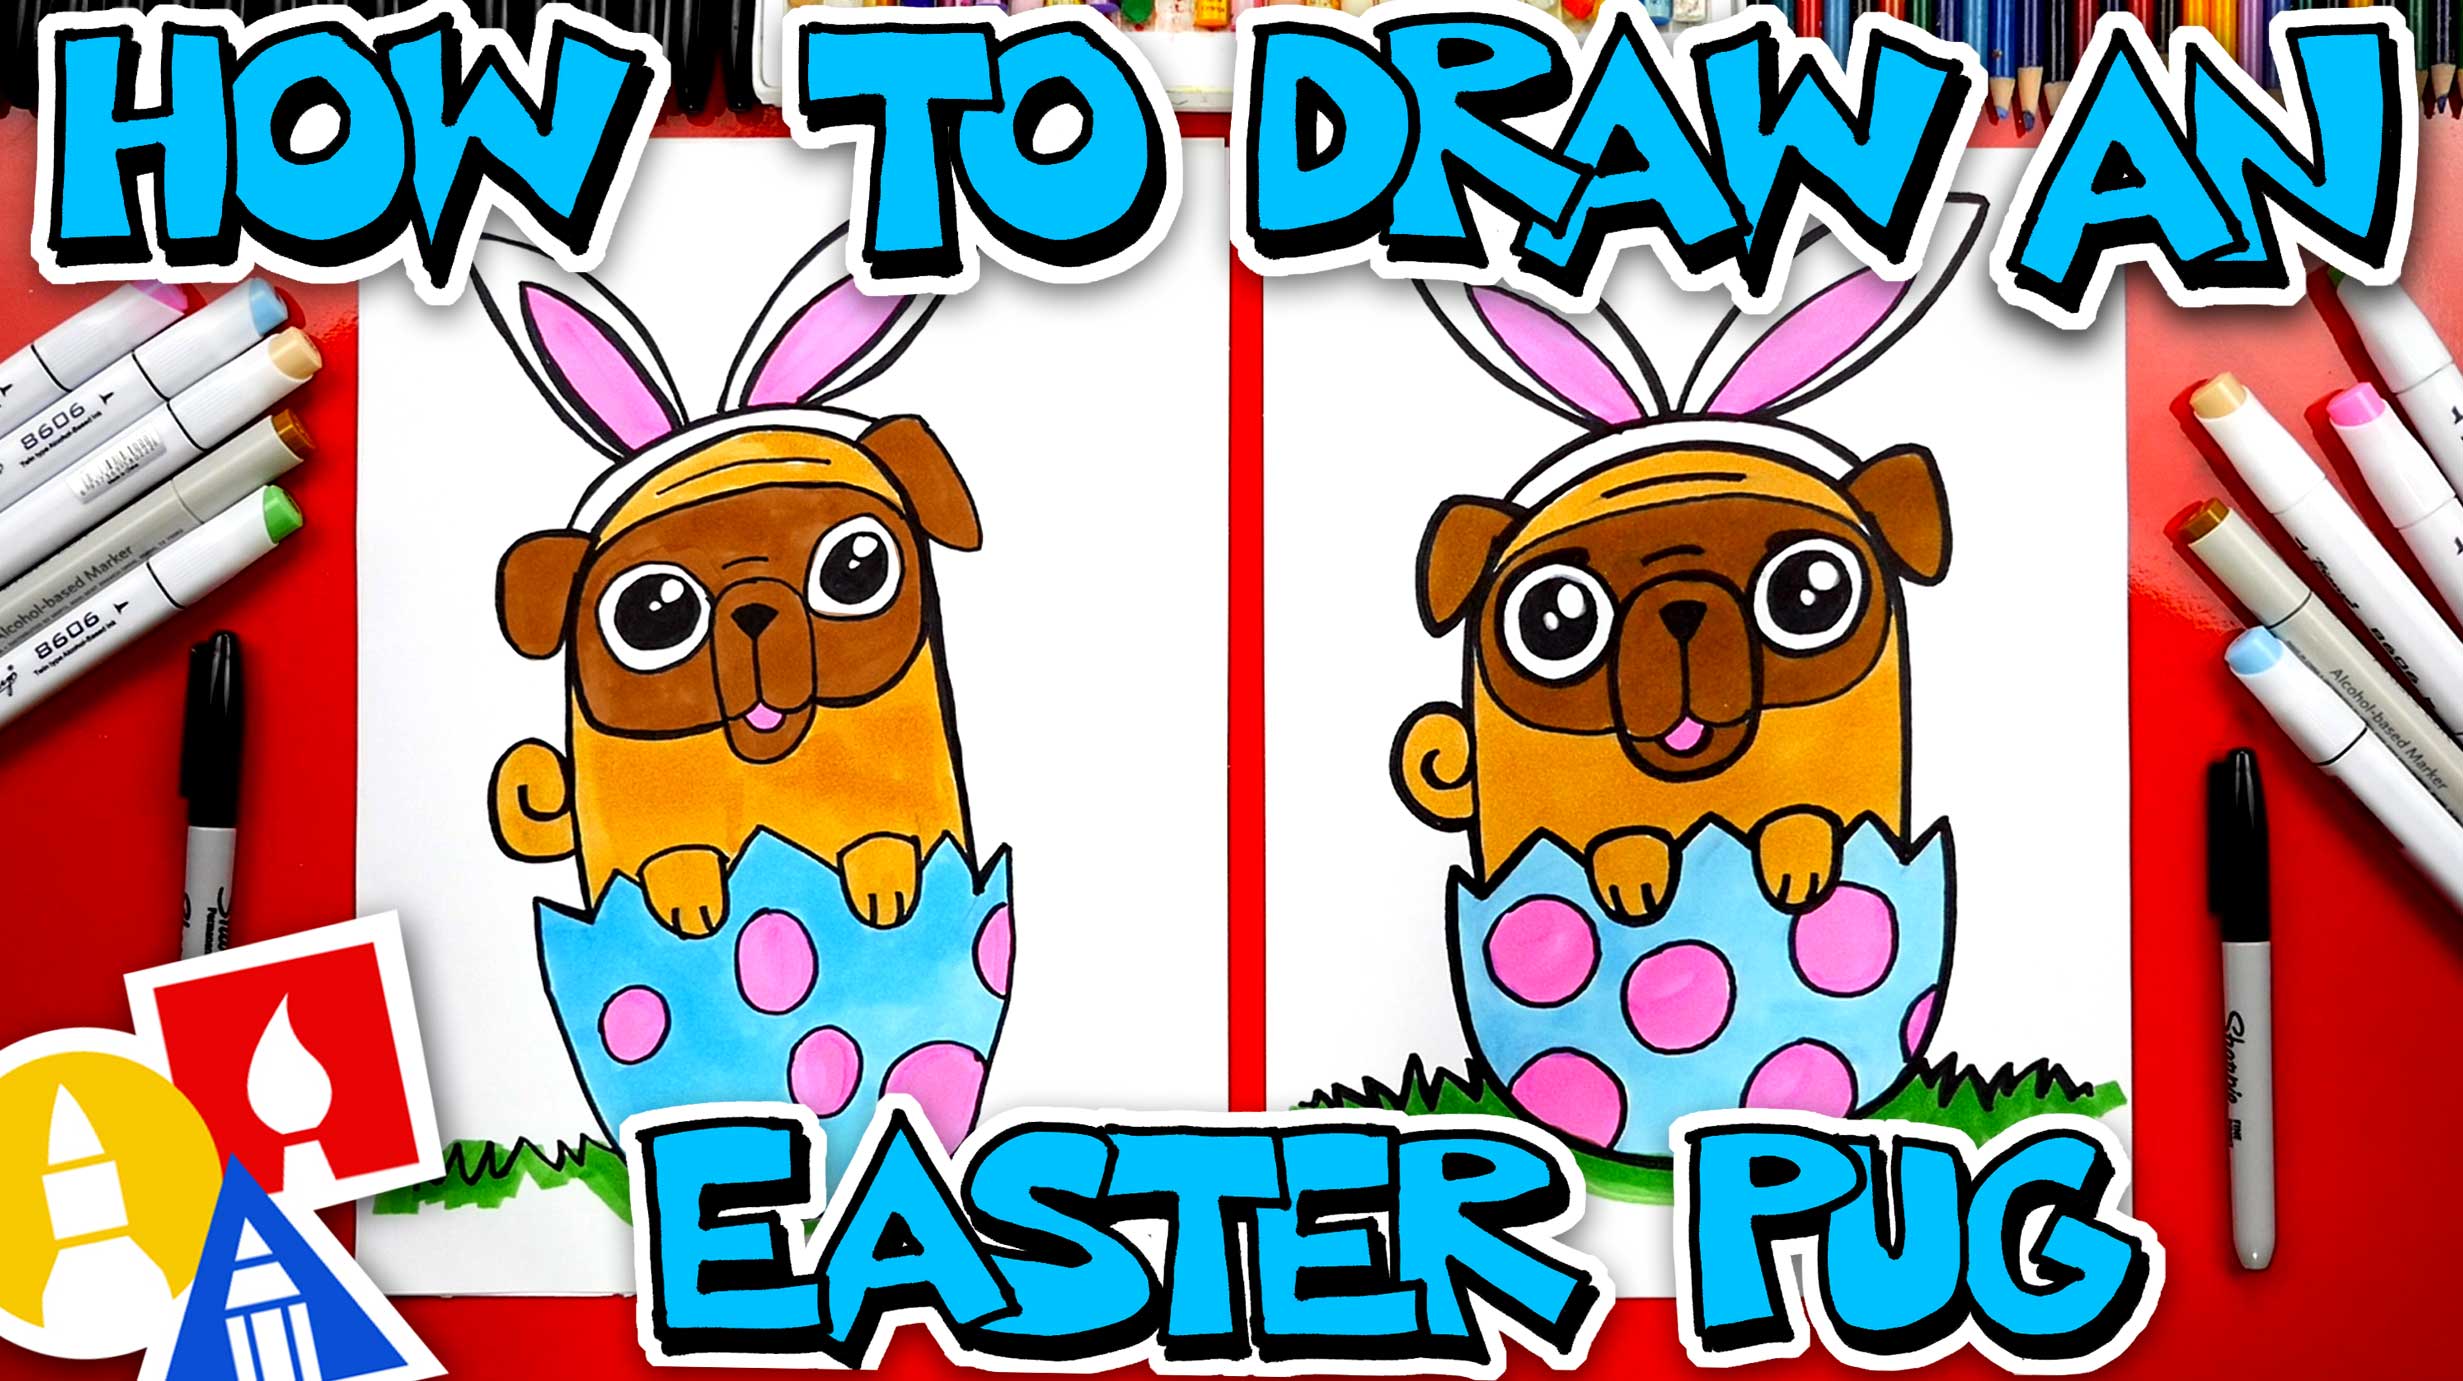 How To Draw An Easter Pug Bunny - Art For Kids Hub